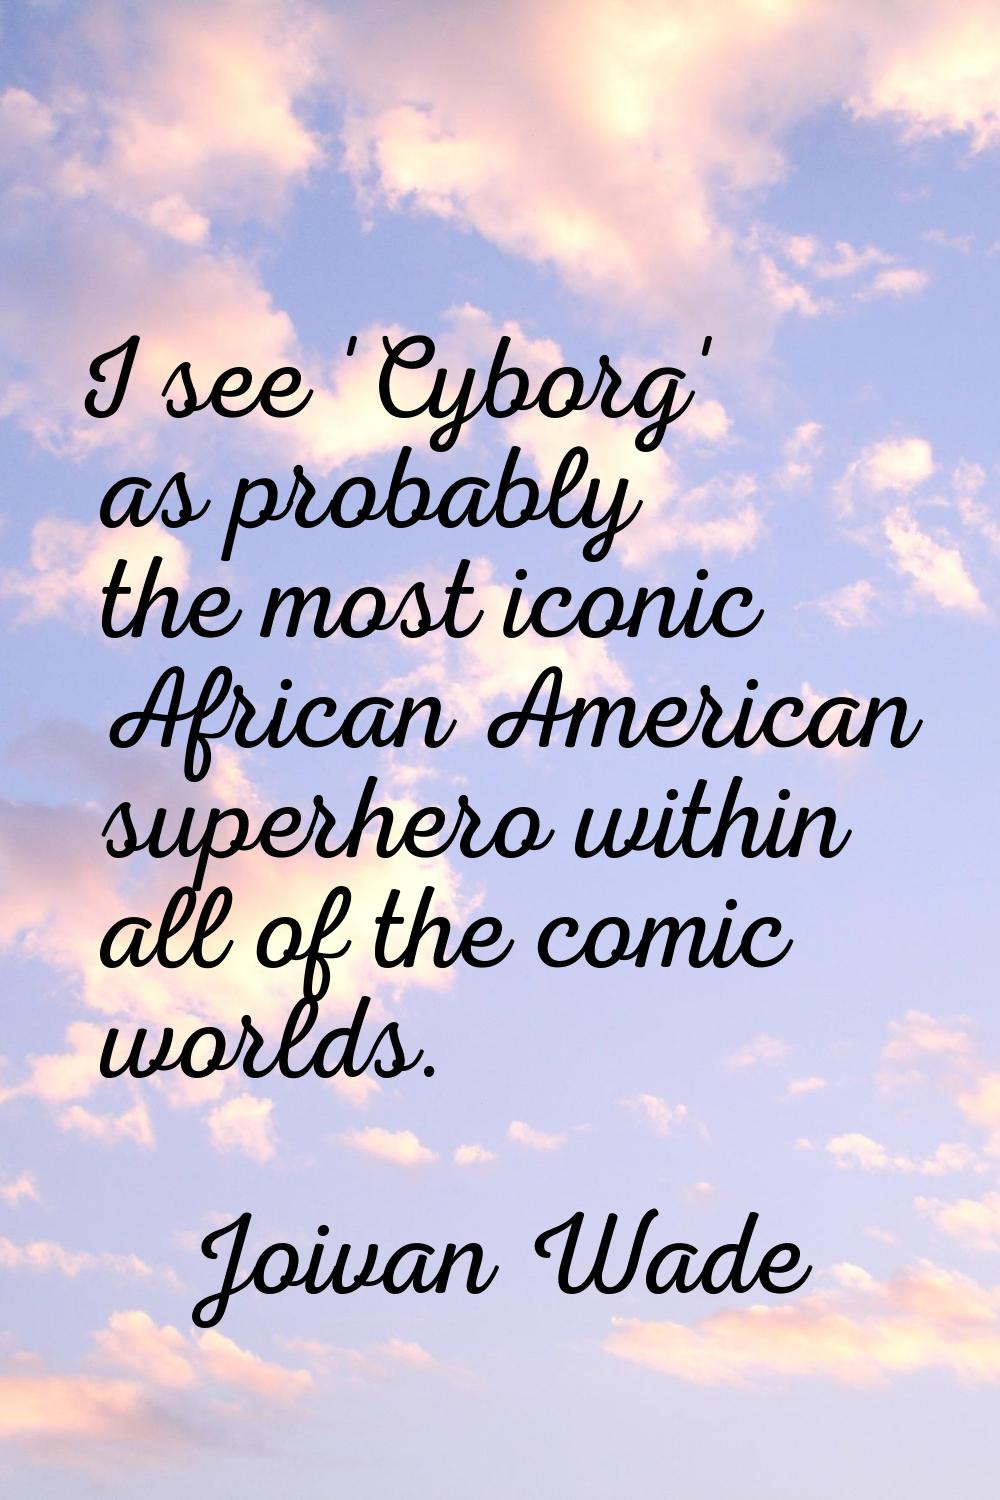 I see 'Cyborg' as probably the most iconic African American superhero within all of the comic world